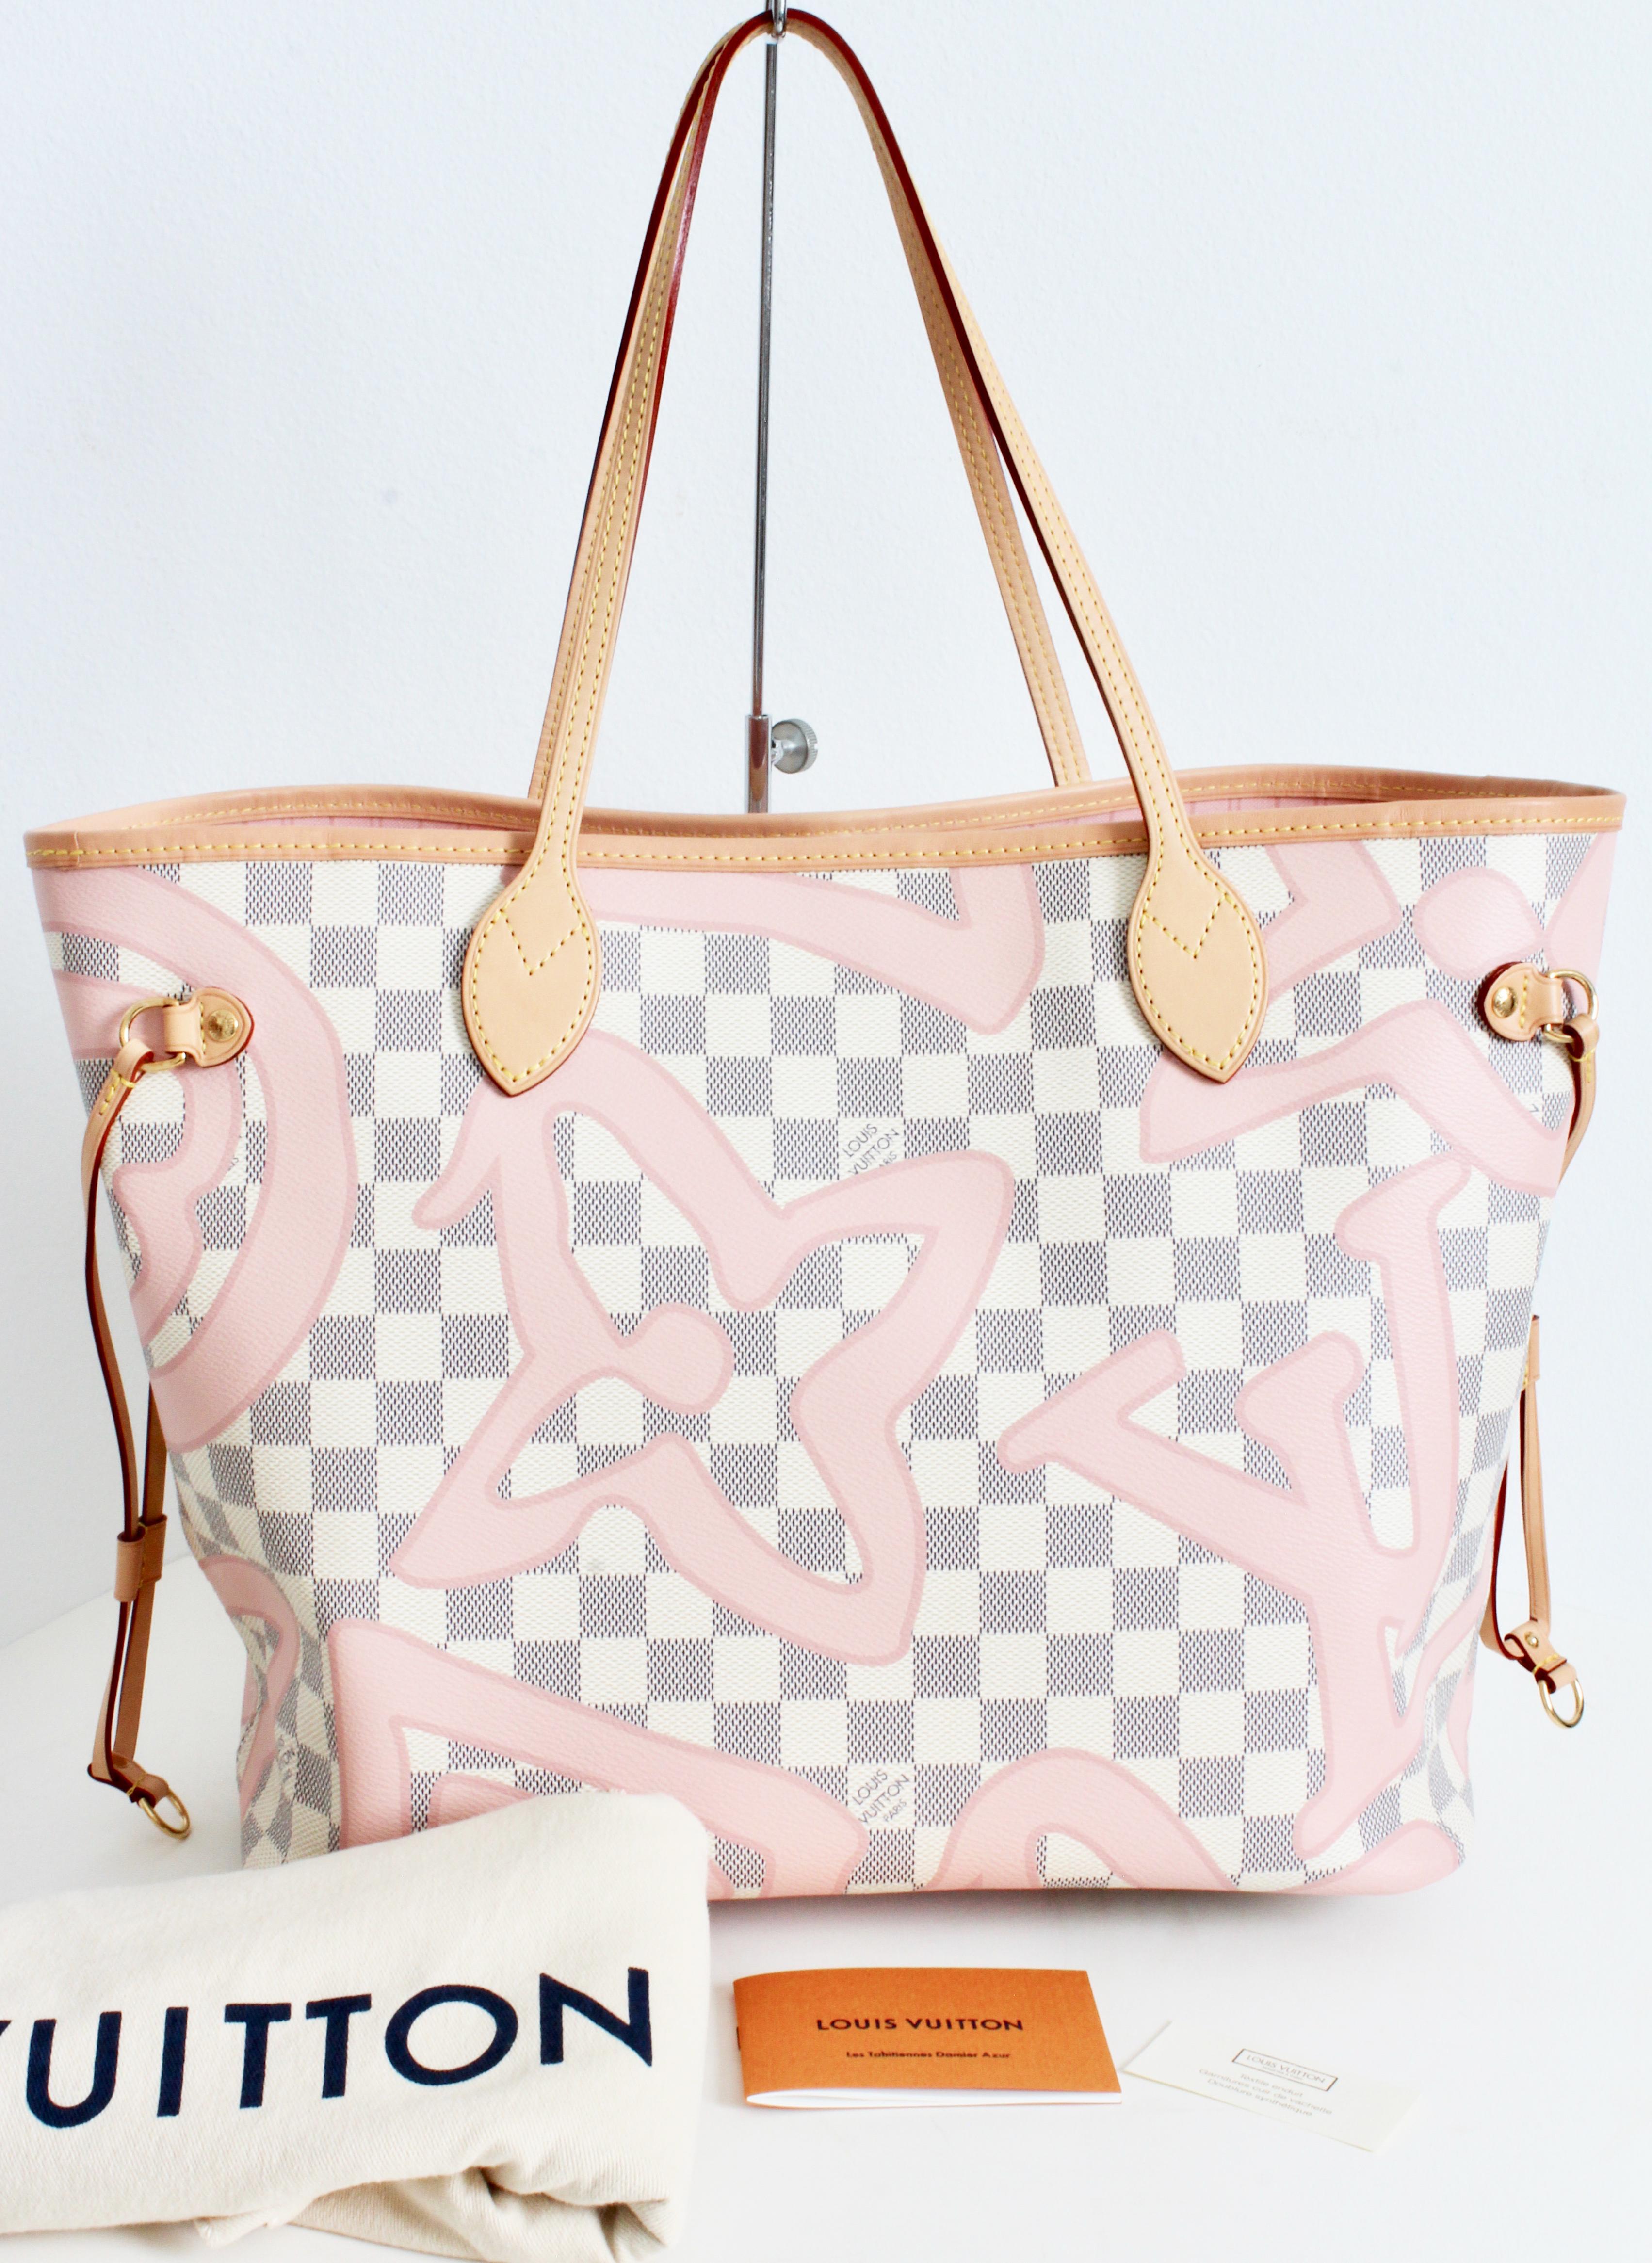 Louis Vuitton Damier Azur Tahitiennes Neverfull MM Tote Bag, from the limited edition 2017 Summer Spirit Collection.  Sold out quickly and so hard to find, especially in this condition.  Comes with dust bag, info cards & detachable pochette.  In